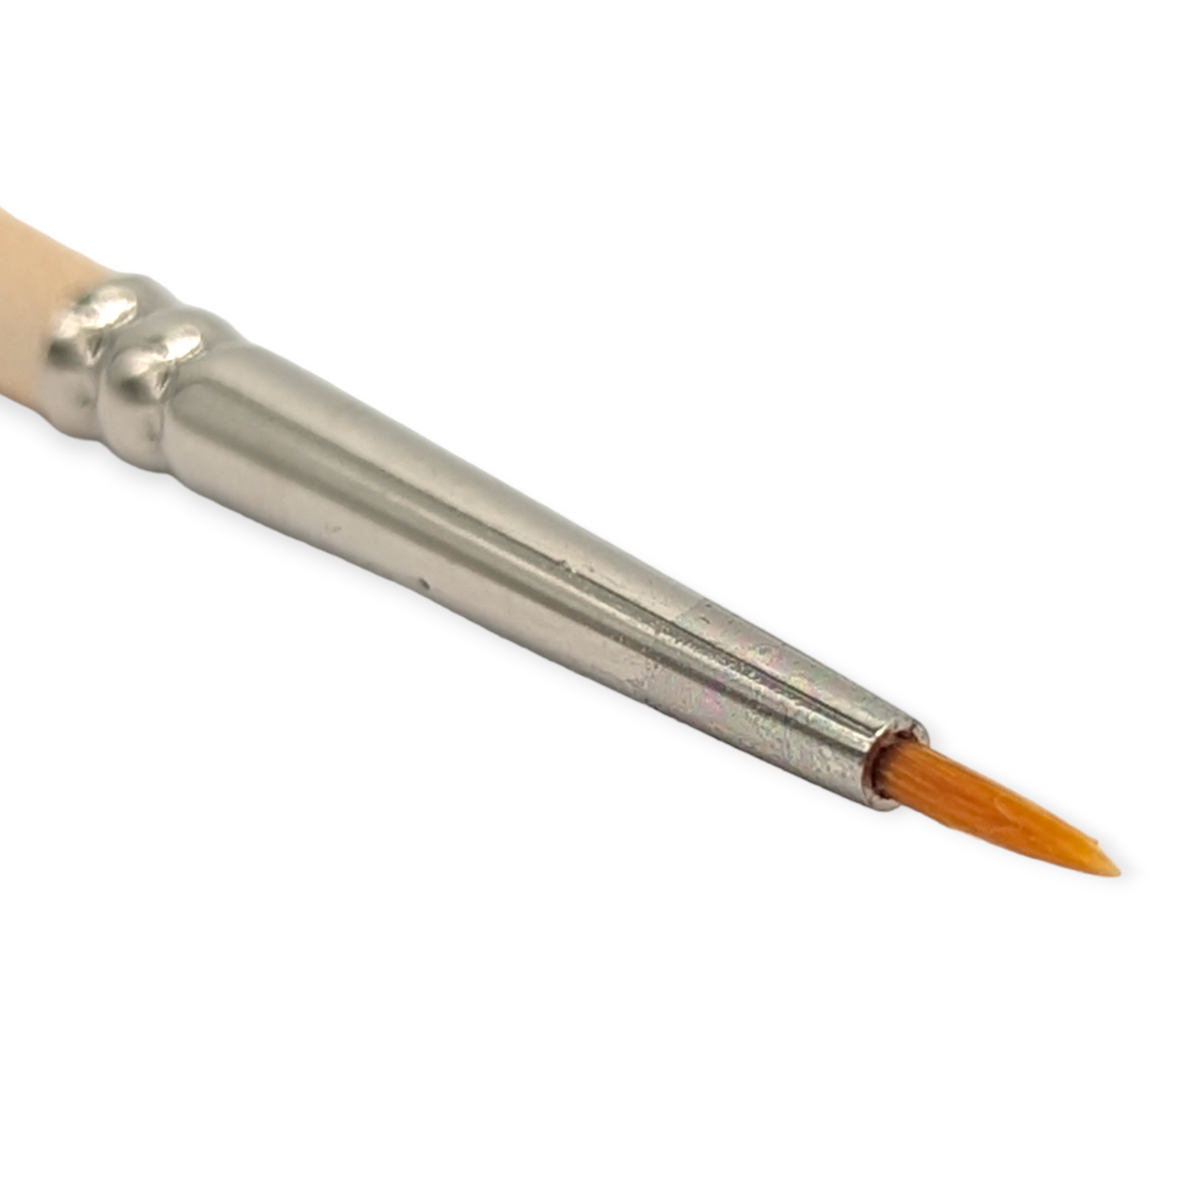 Trekell Golden Taklon Long Handle Brush for Acrylic and Oil Painting